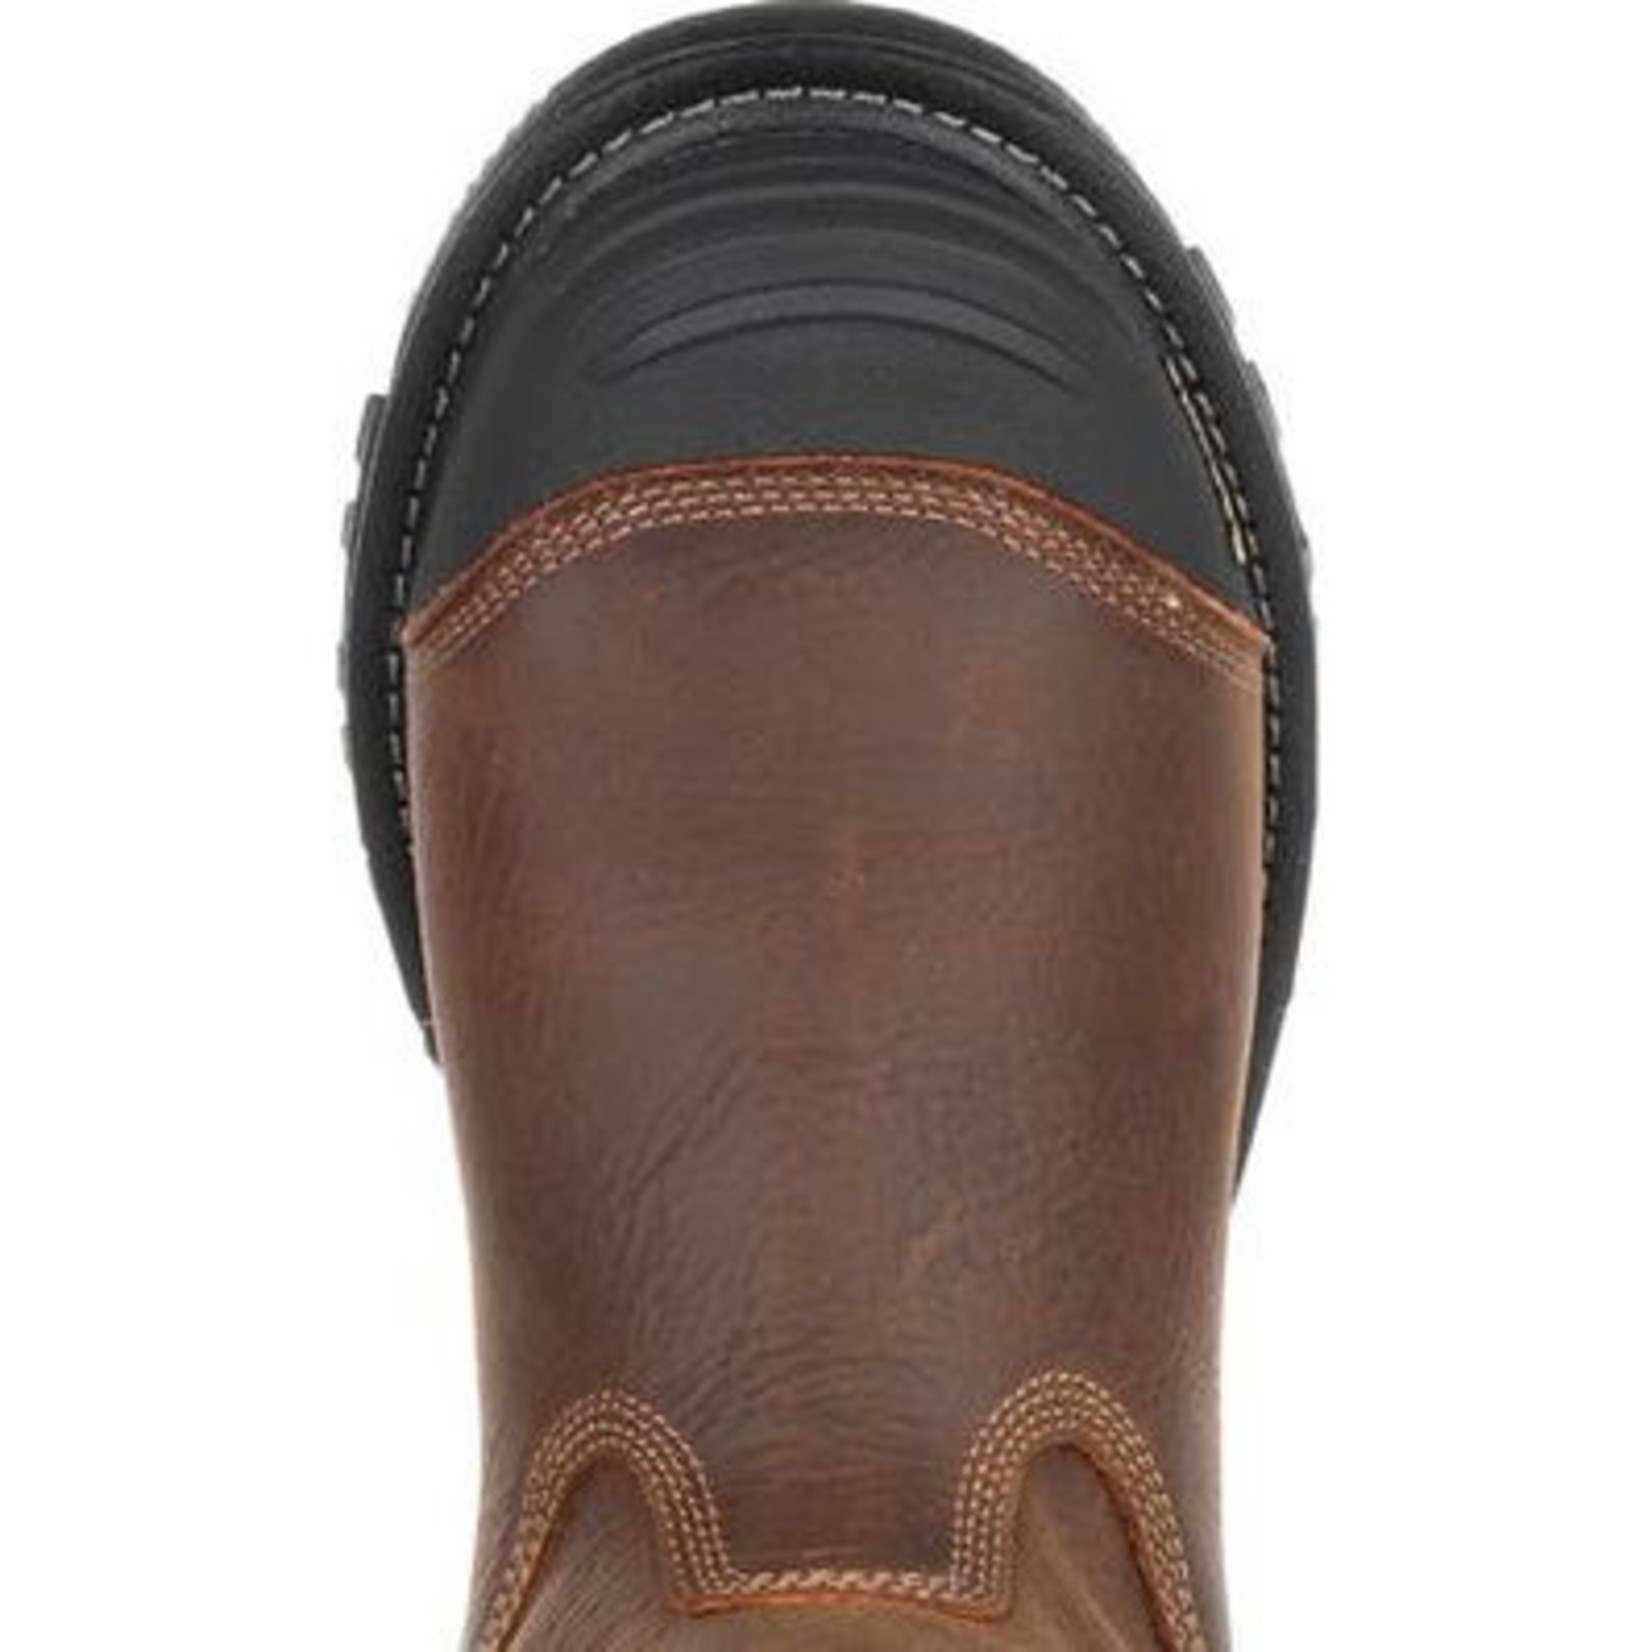 GEORGIA BOOT CO. 10"  RUMBLER PULL-ON CT WP EH